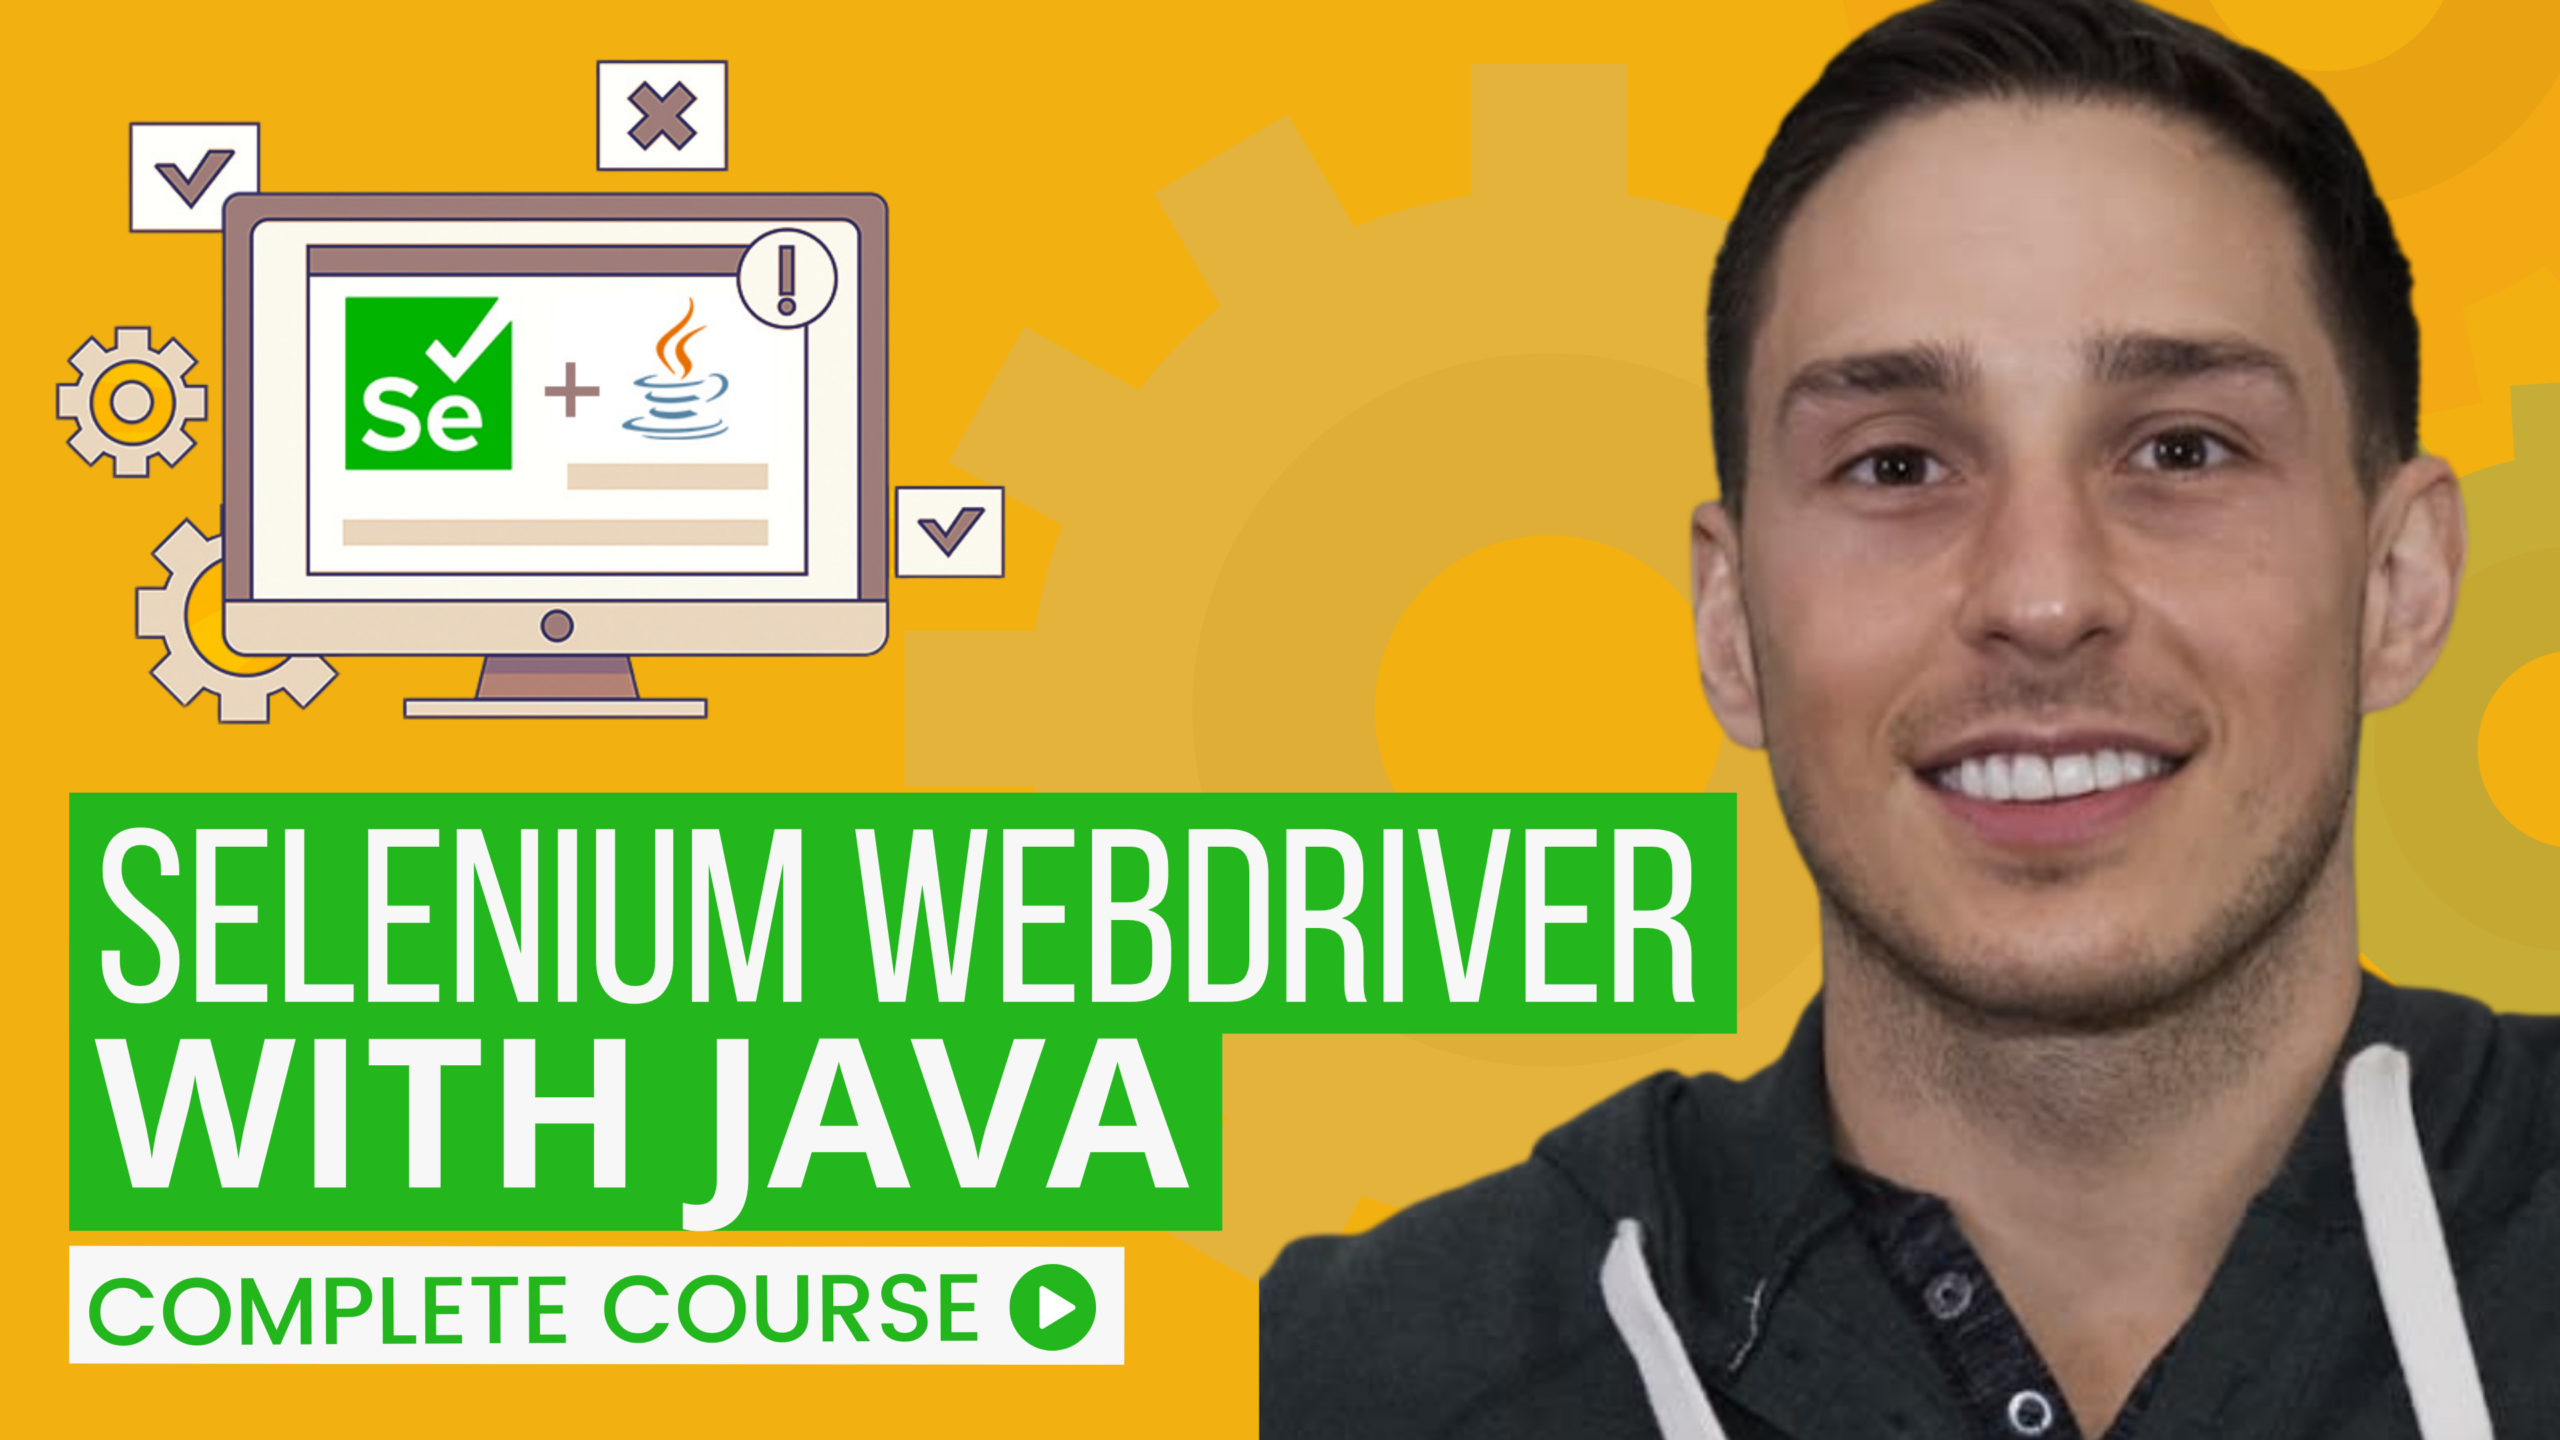 Ultimate QA: Selenium Webdriver With Java by Ultimate QA